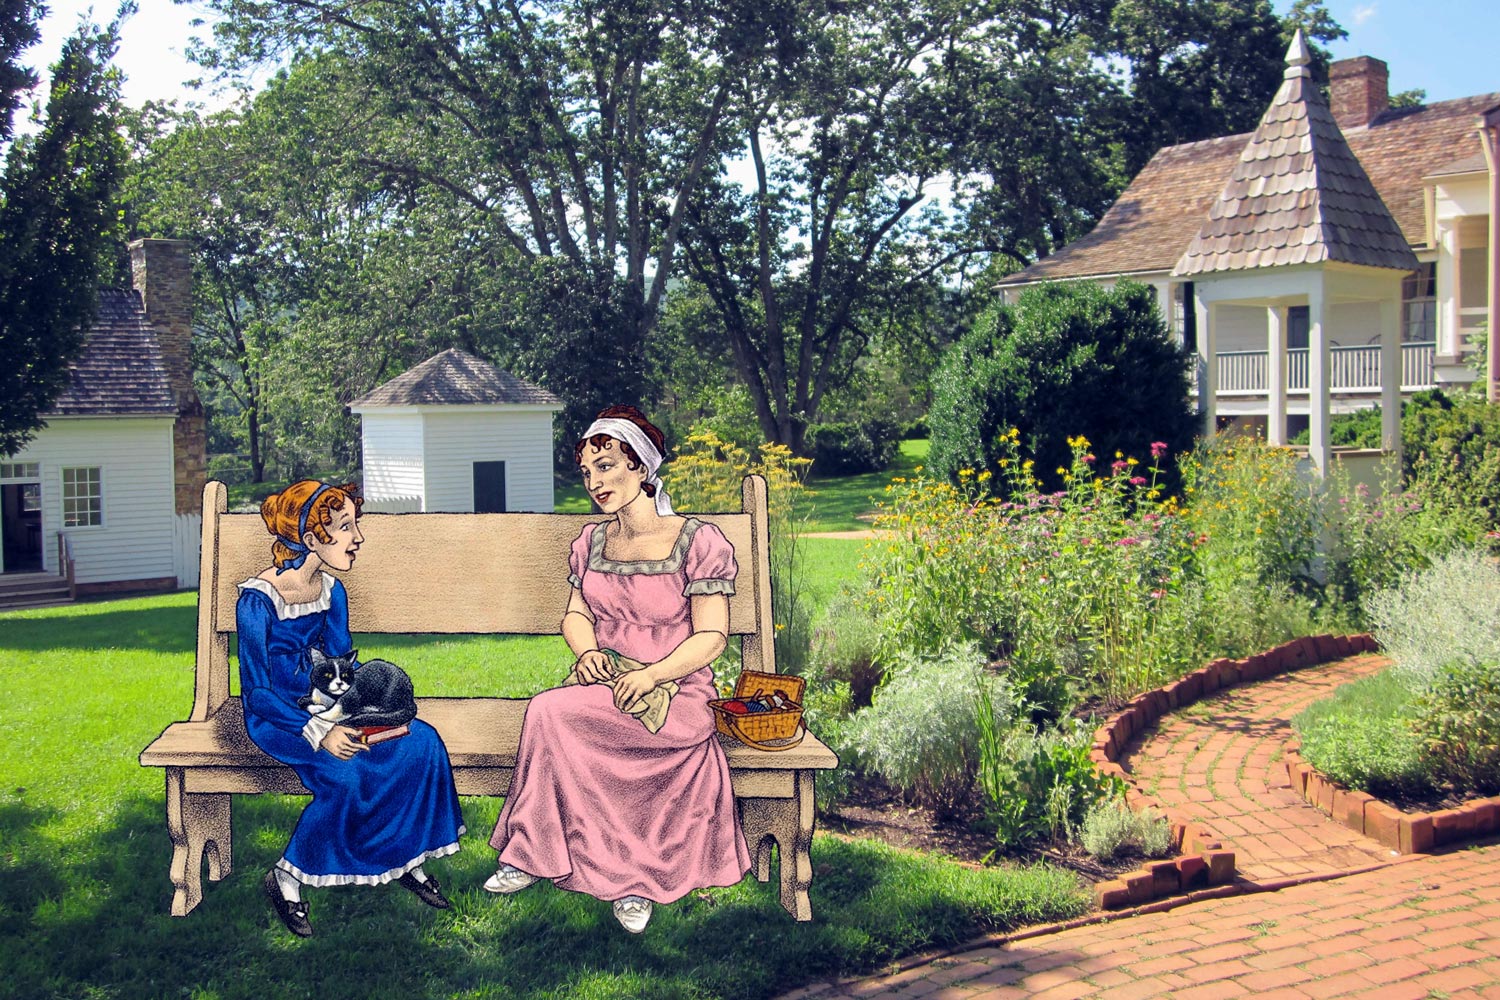 drawing of James Monroes wife and granddaughter sitting on a bench in a garden